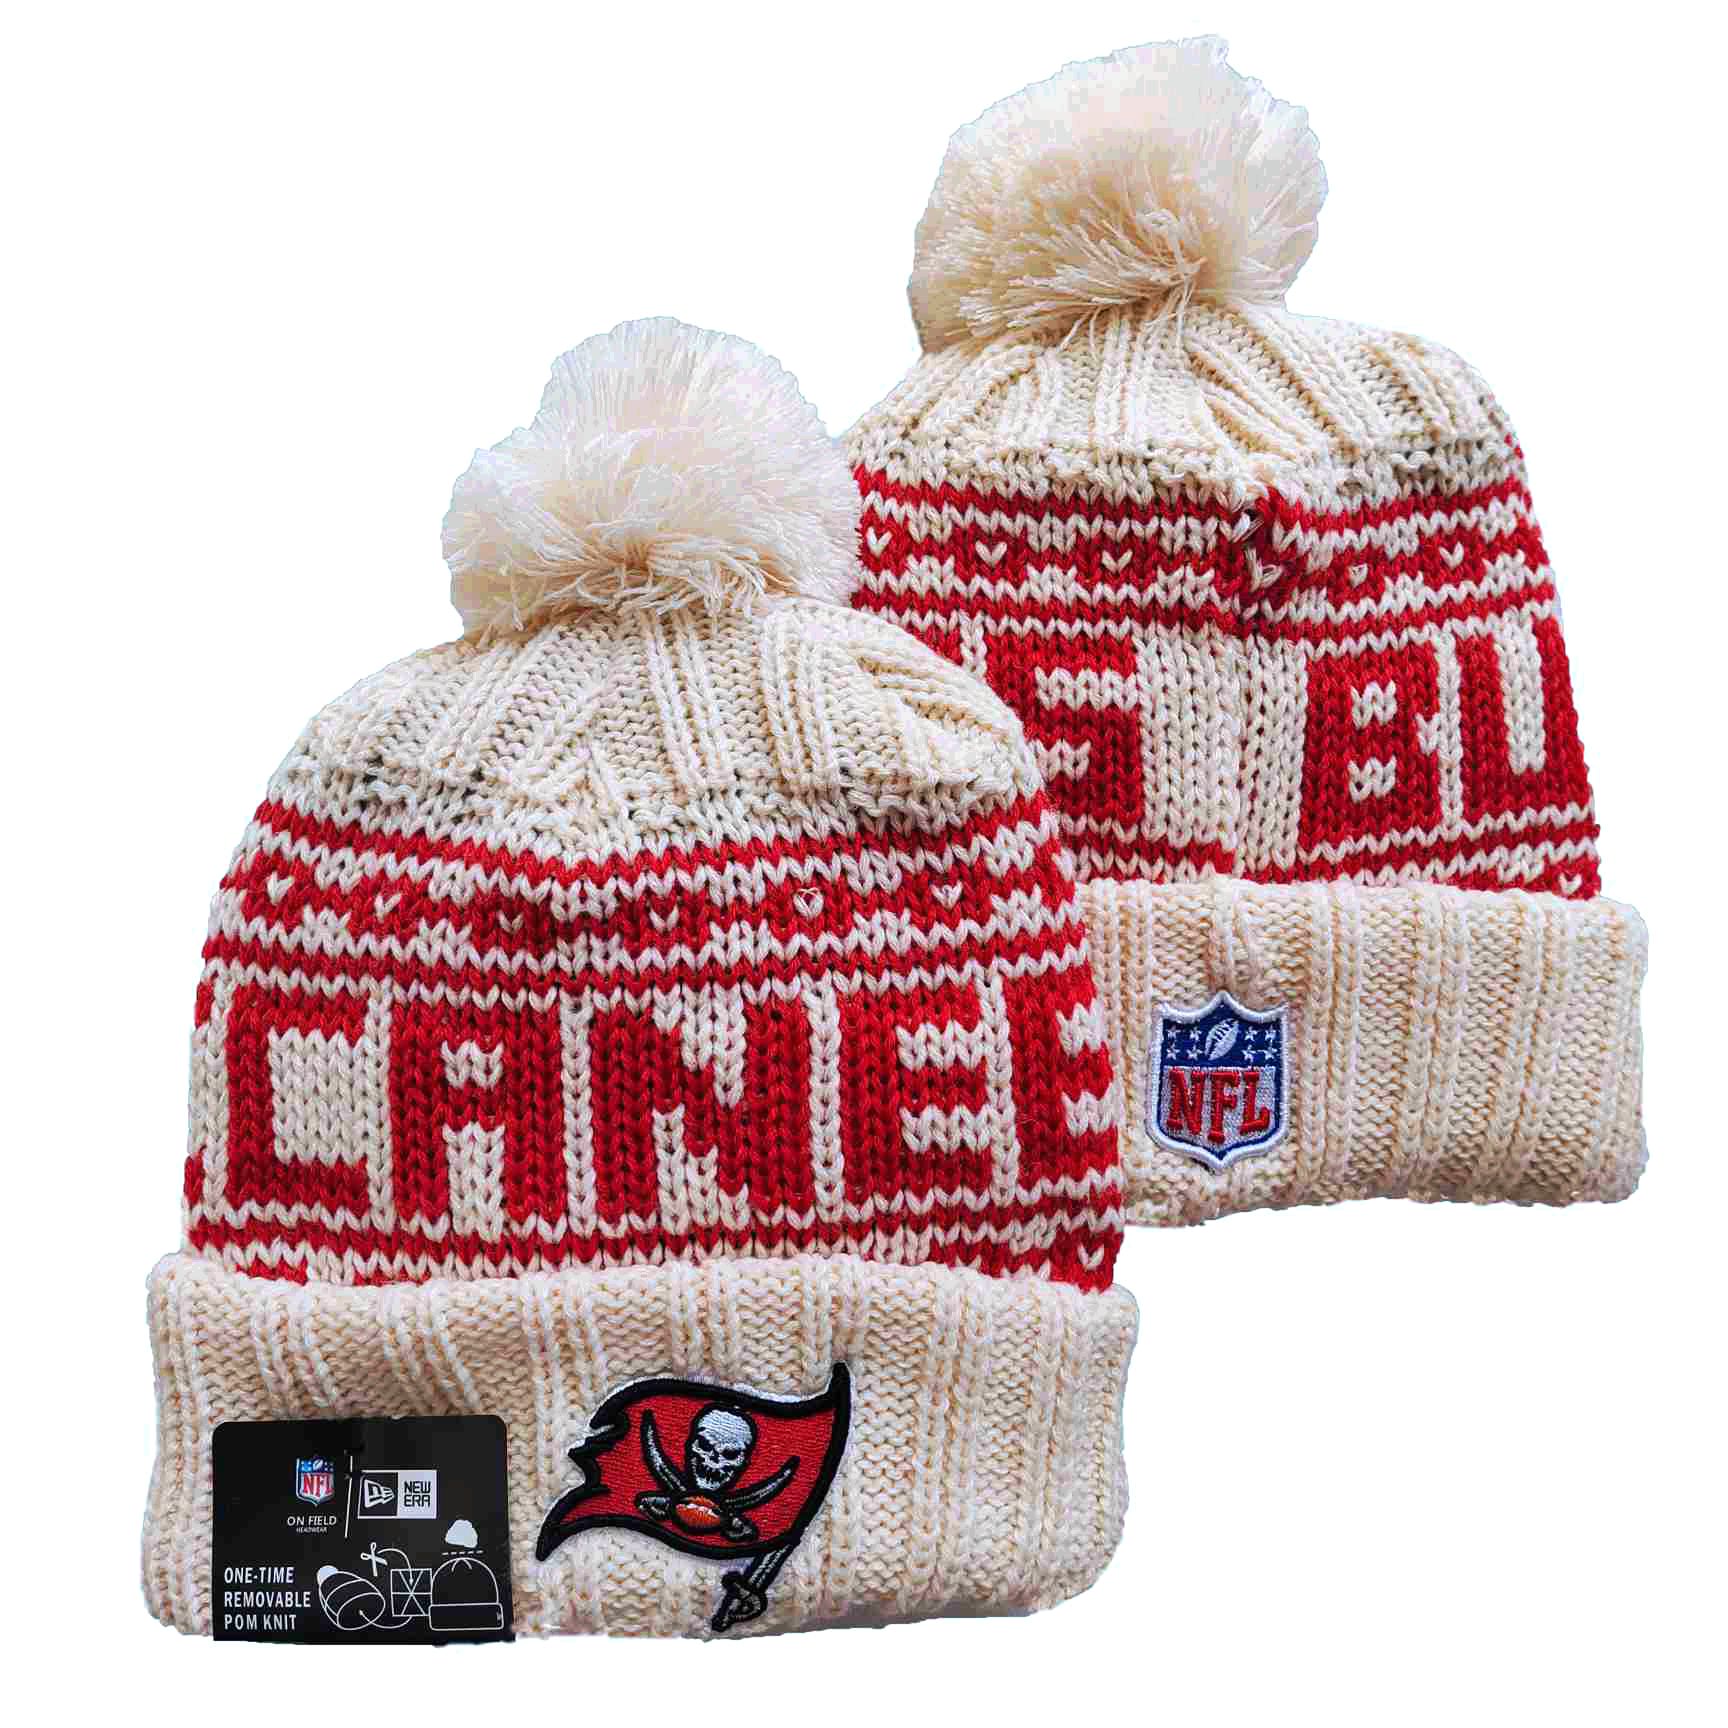 Tampa Bay Buccaneers 2021 Knit Hats 025